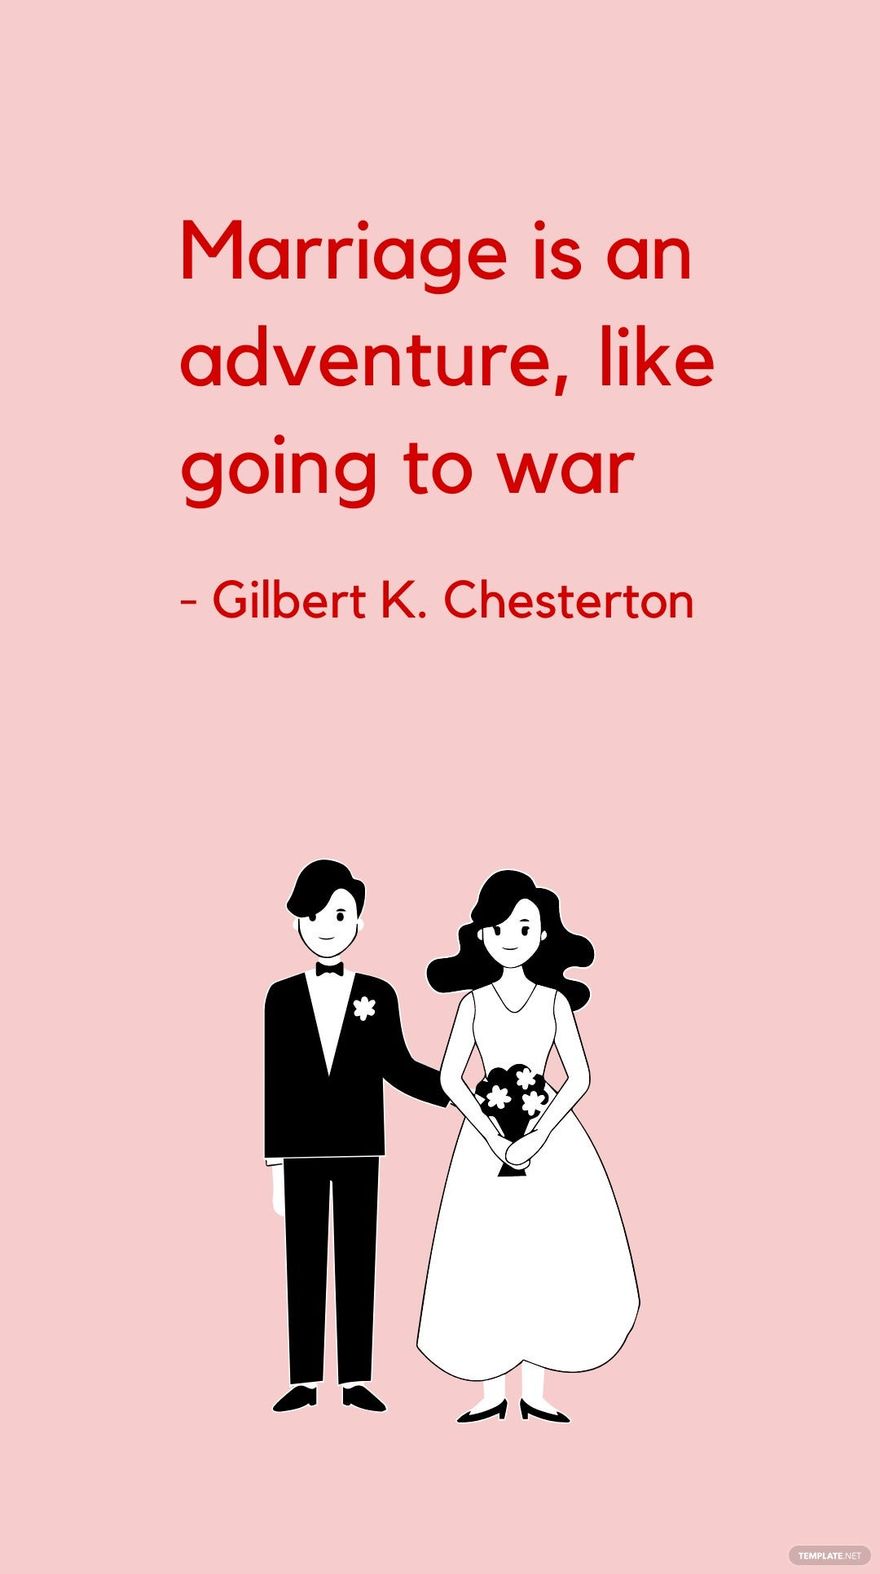 Gilbert K. Chesterton - Marriage is an adventure, like going to war in JPG